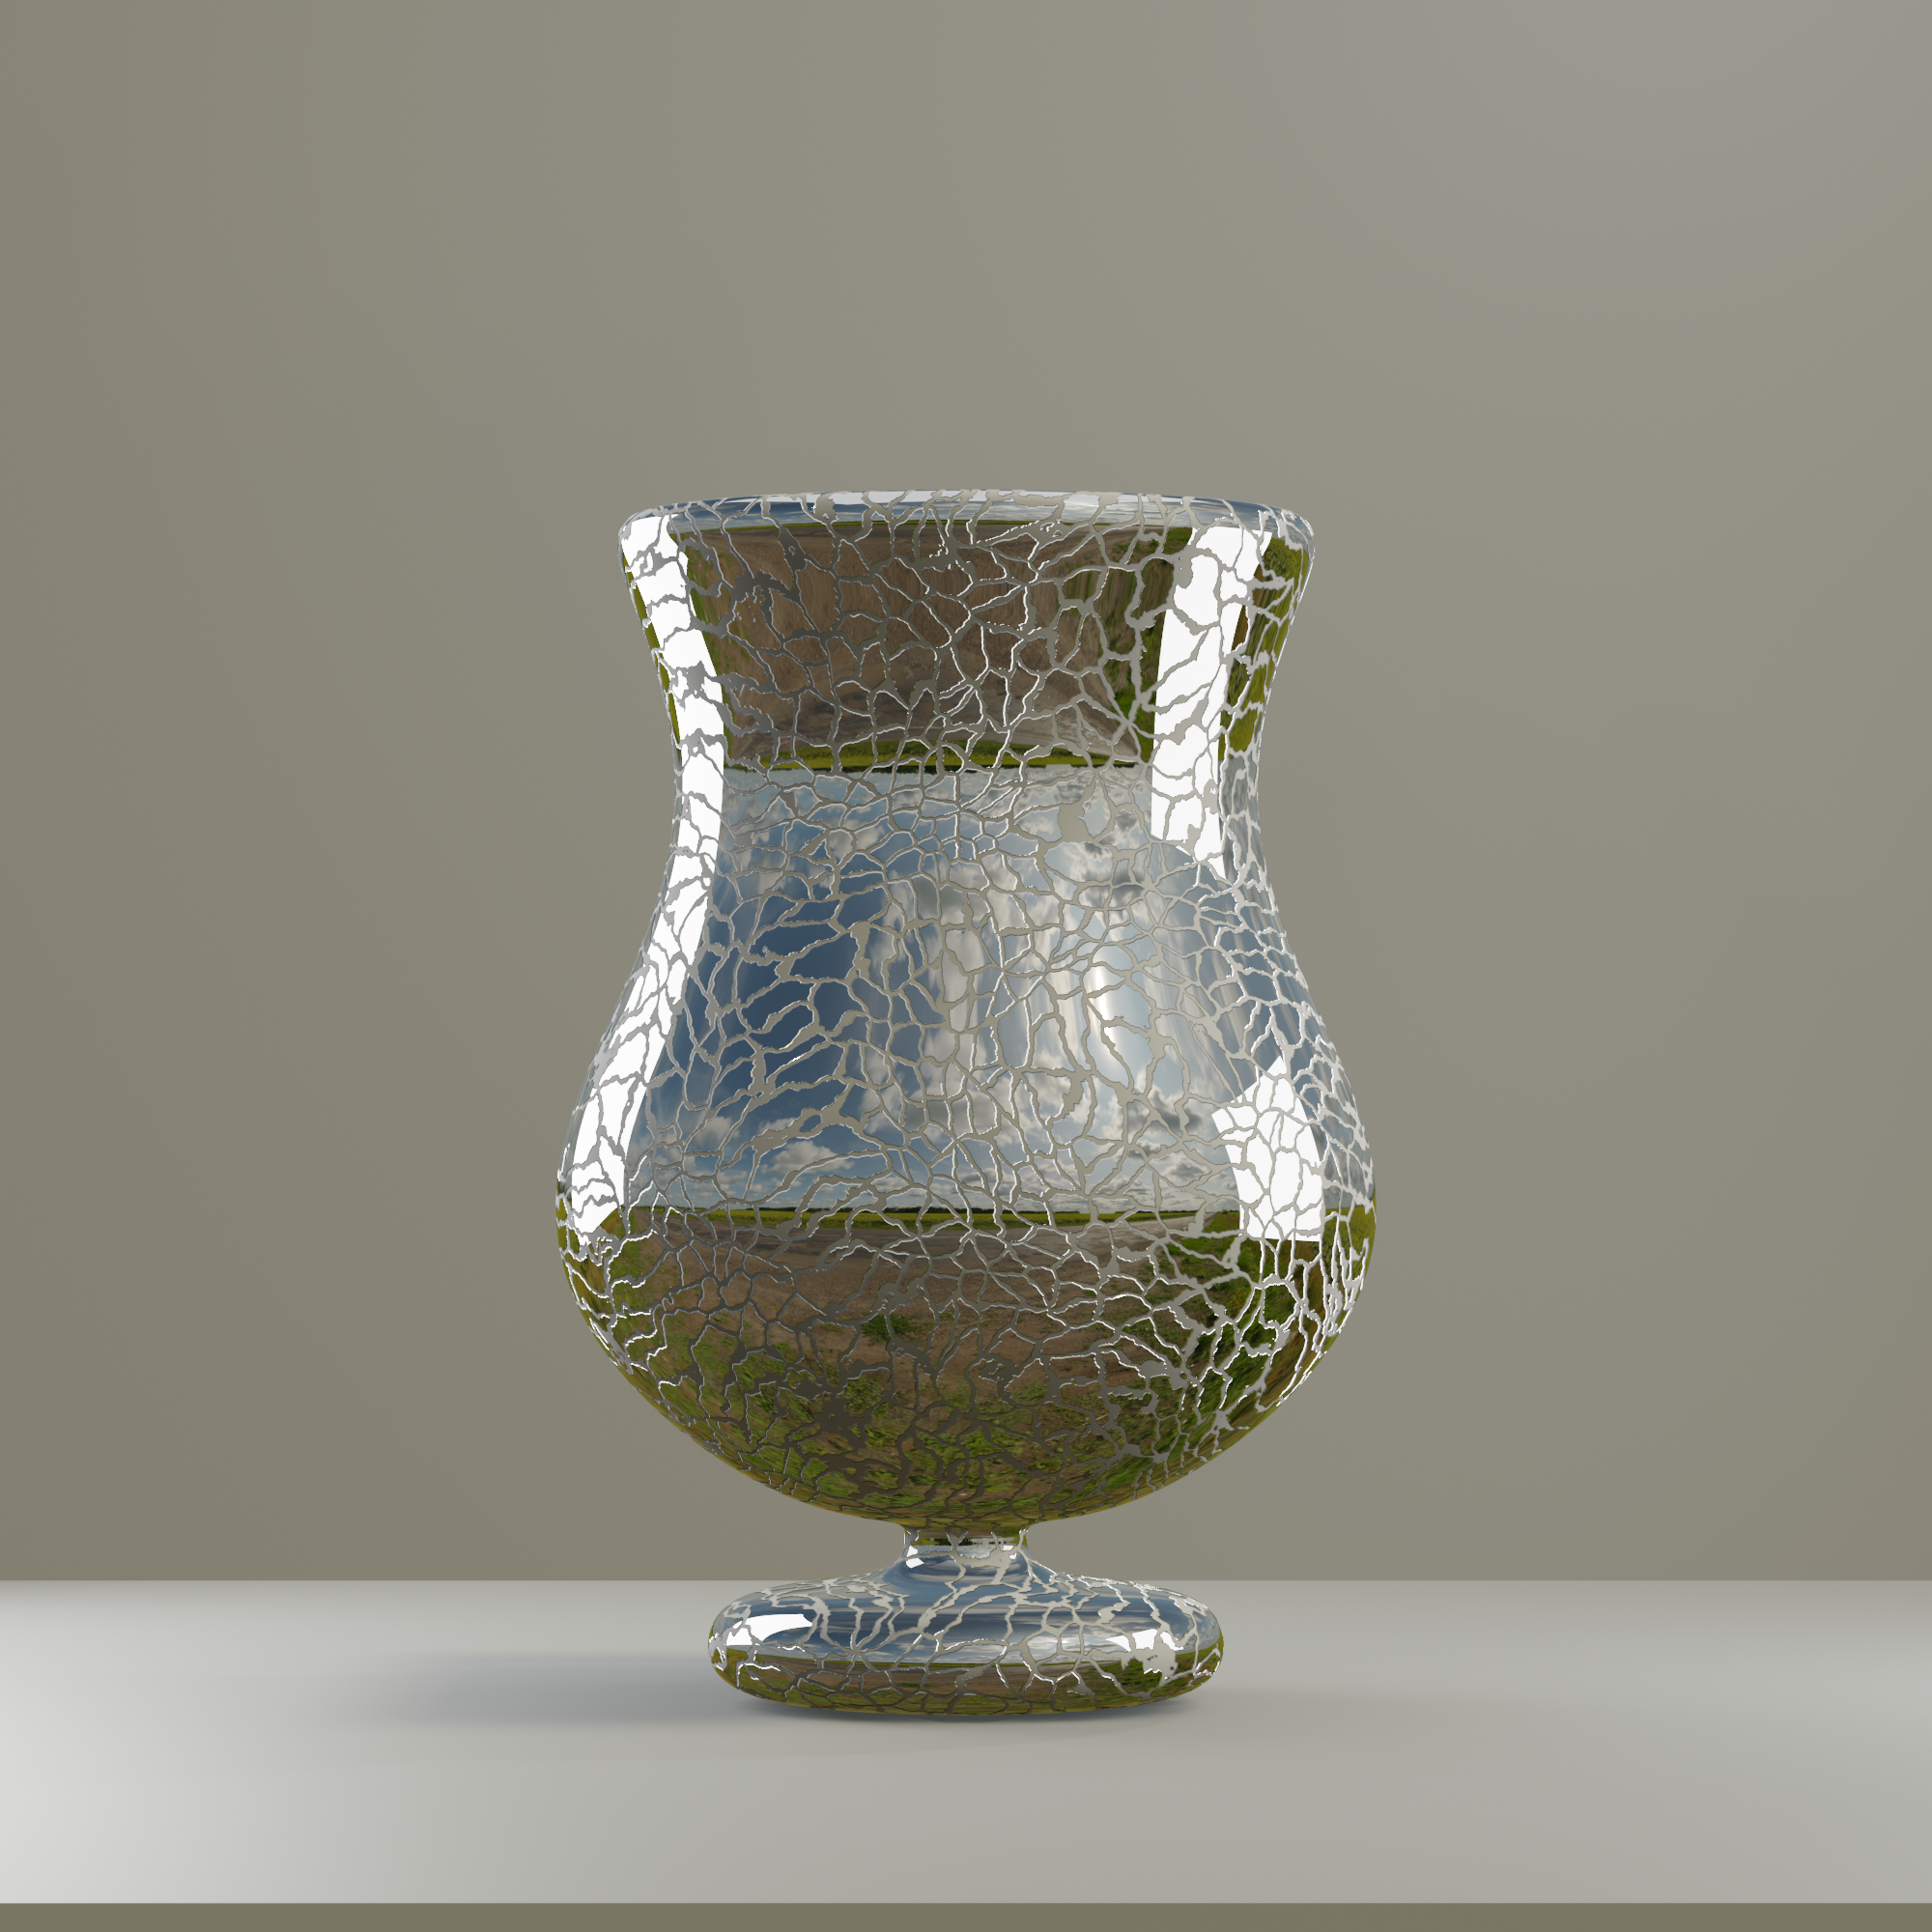 Pack of vases preview image 5